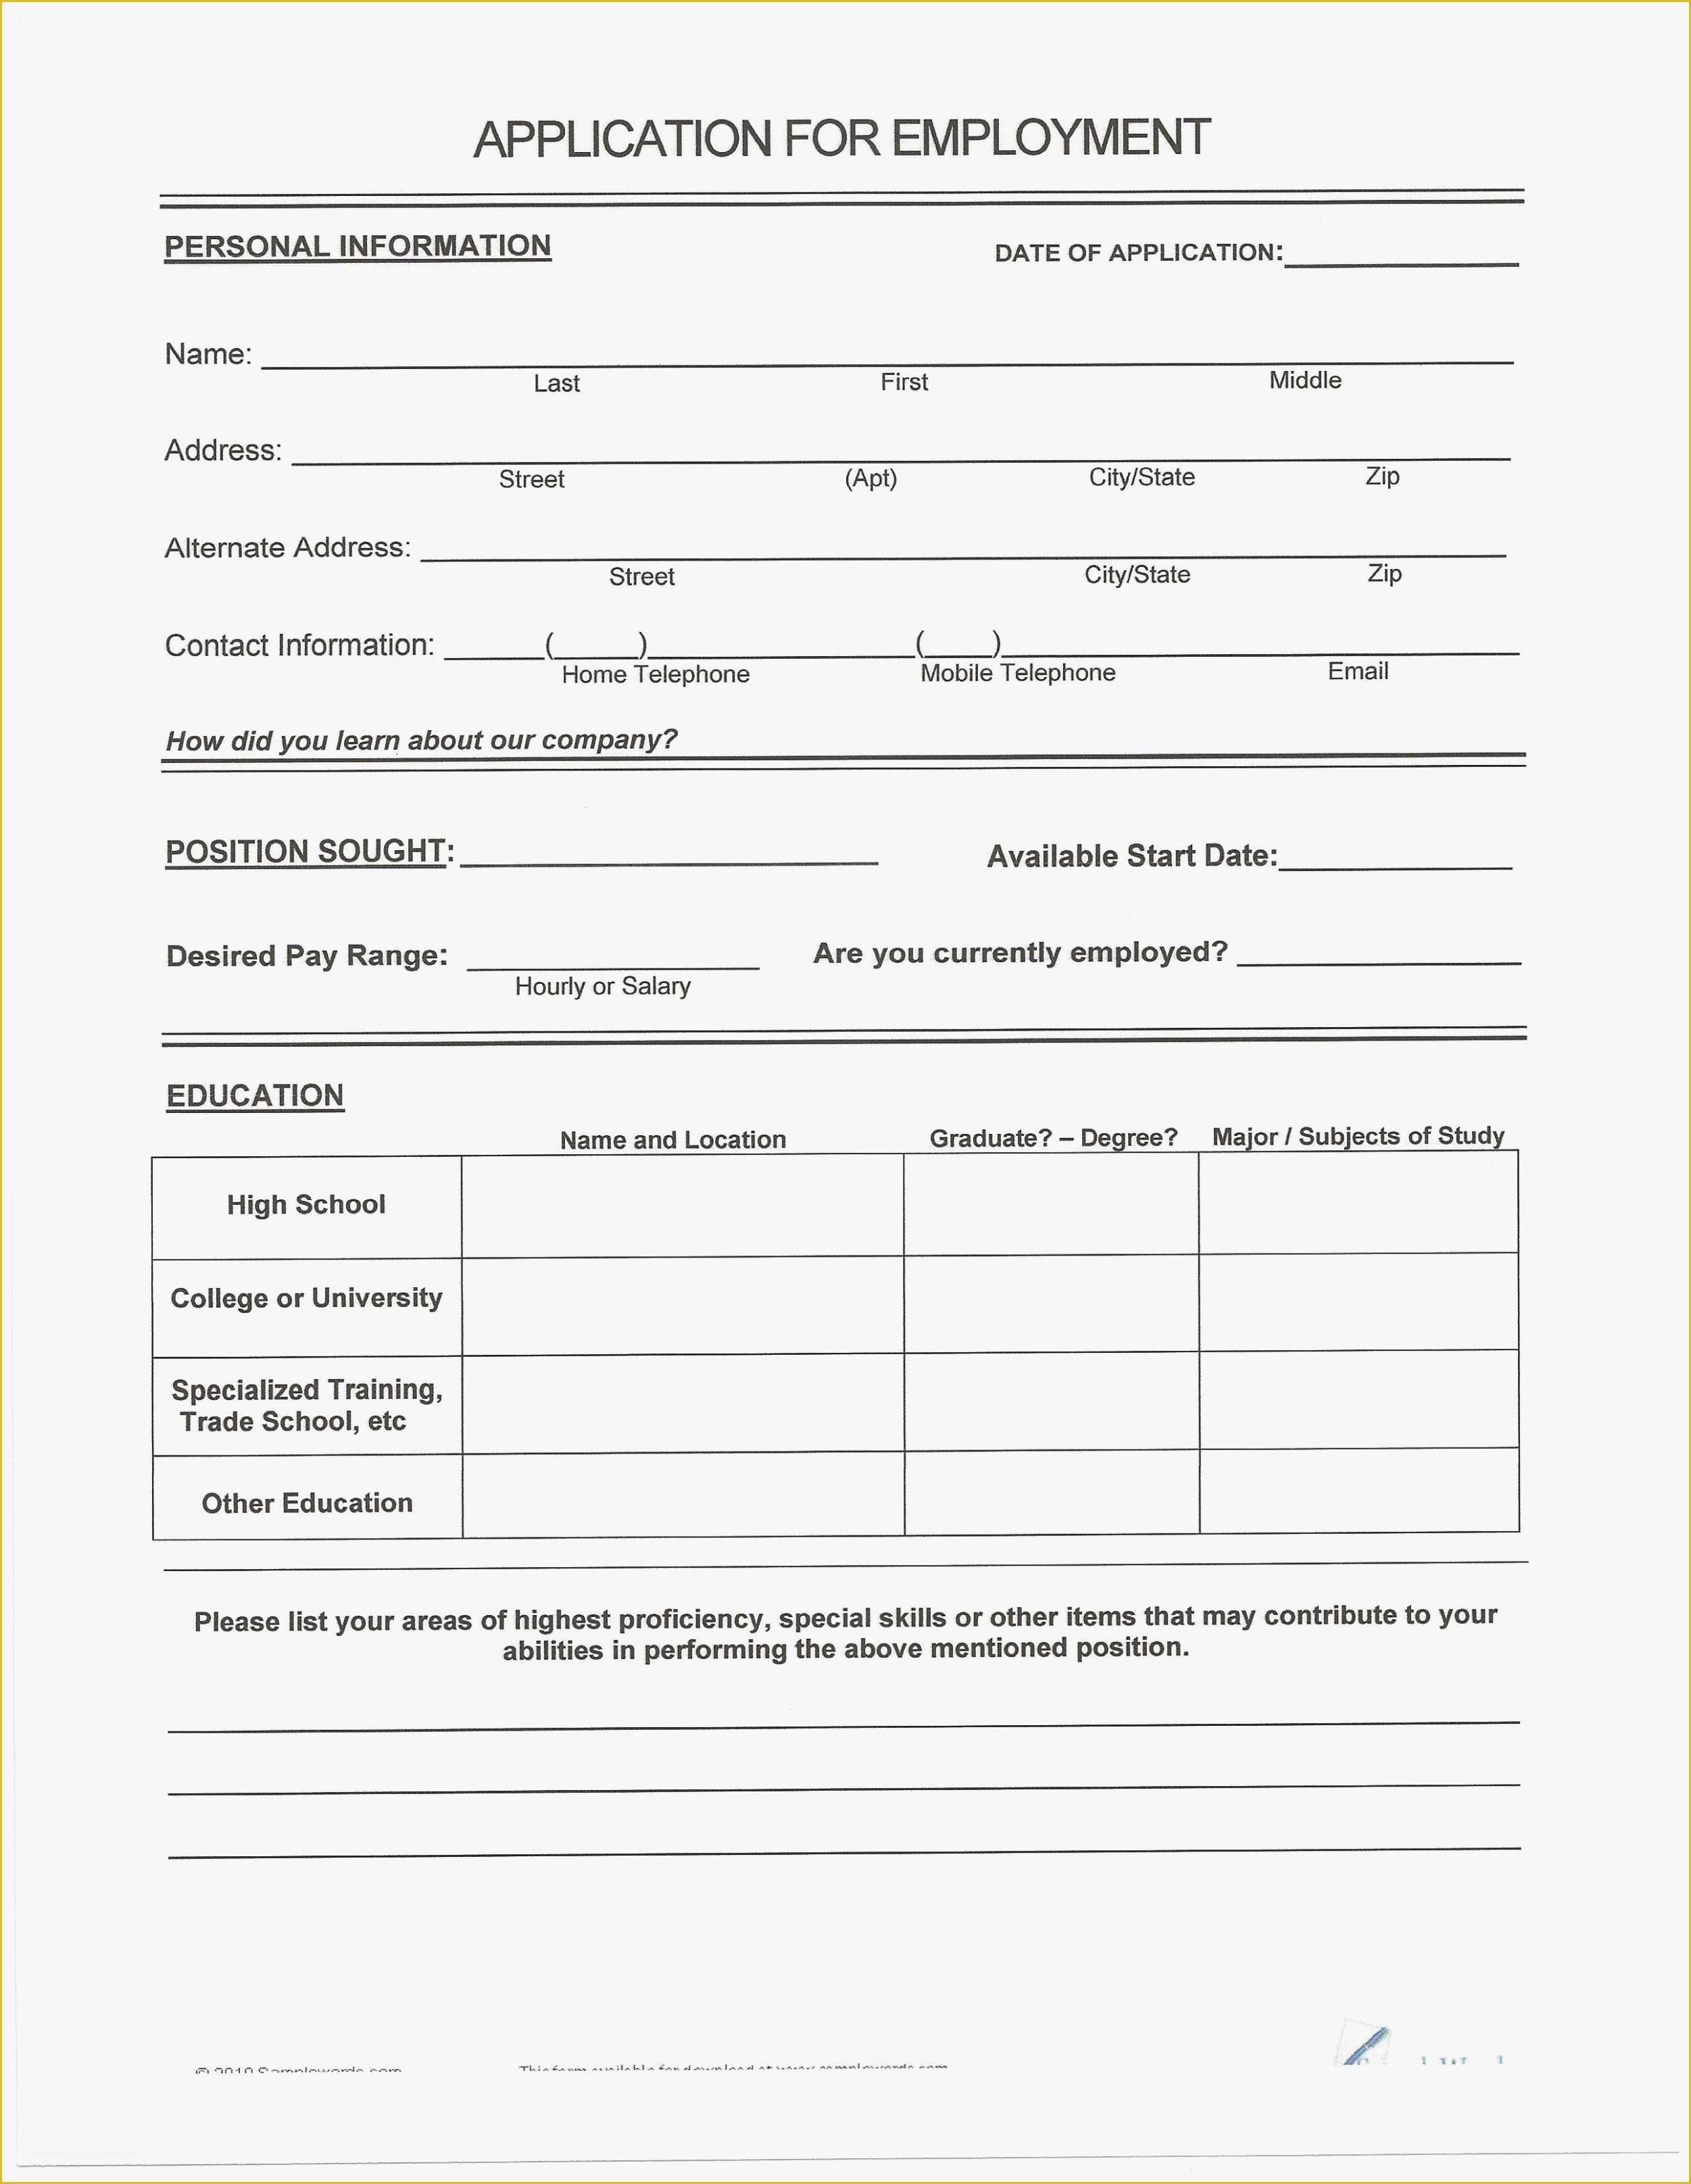 Free Resume Templates to Fill In and Print Of Resume and Template Free Resume forms to Fill Out Free